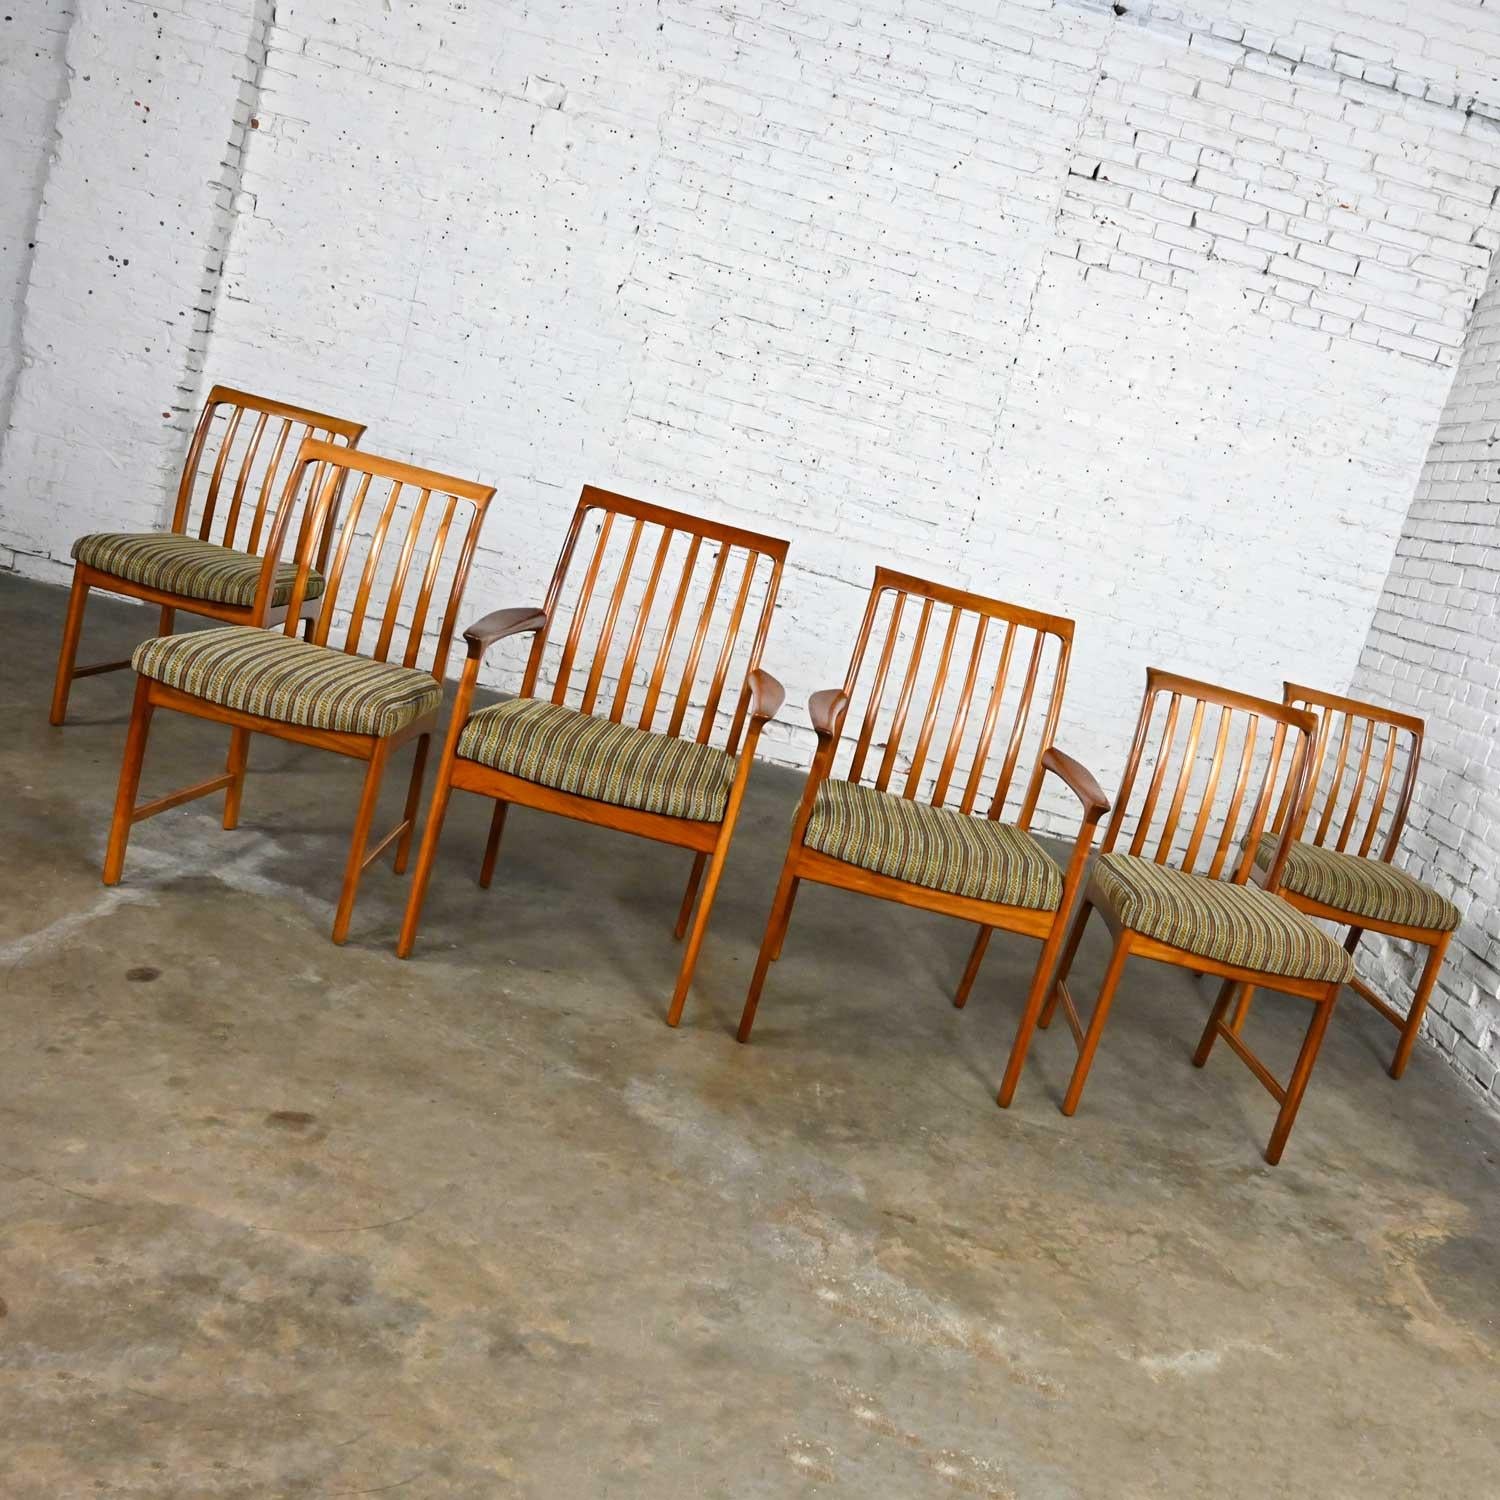 Stunning vintage Scandinavian modern dining chairs by Folke Ohlsson for DUX, four side and two armchairs, set of 6. Also includes 2 loose back cushions for armed chairs. Beautiful condition, keeping in mind that these are vintage and not new so will